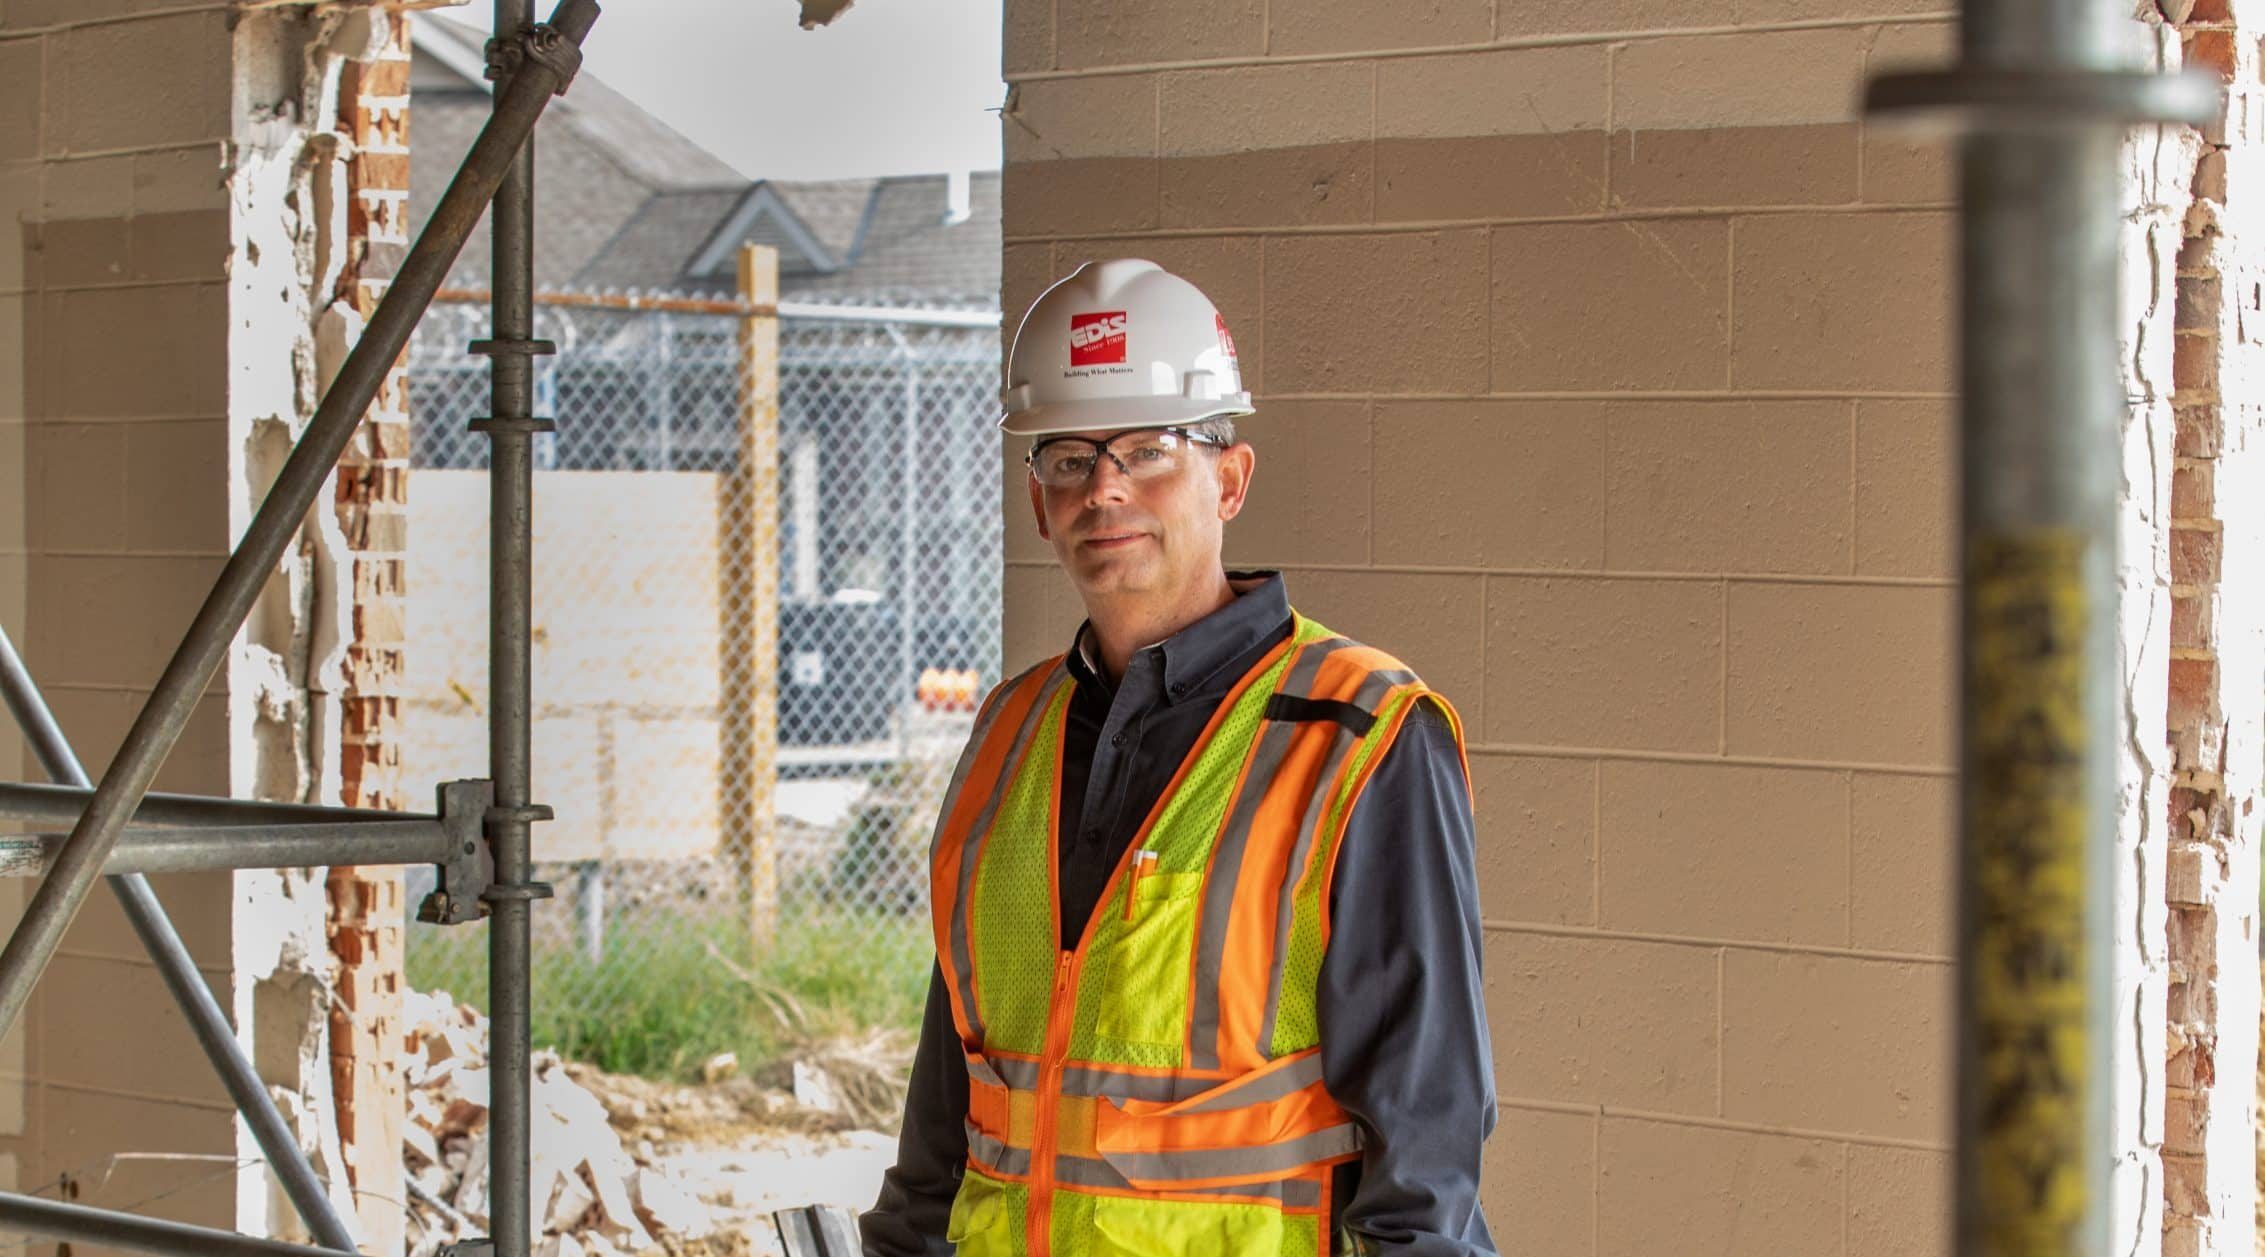 Preventing Suicide in Construction – A Message from Director of Safety & Health Jim Ruggiero